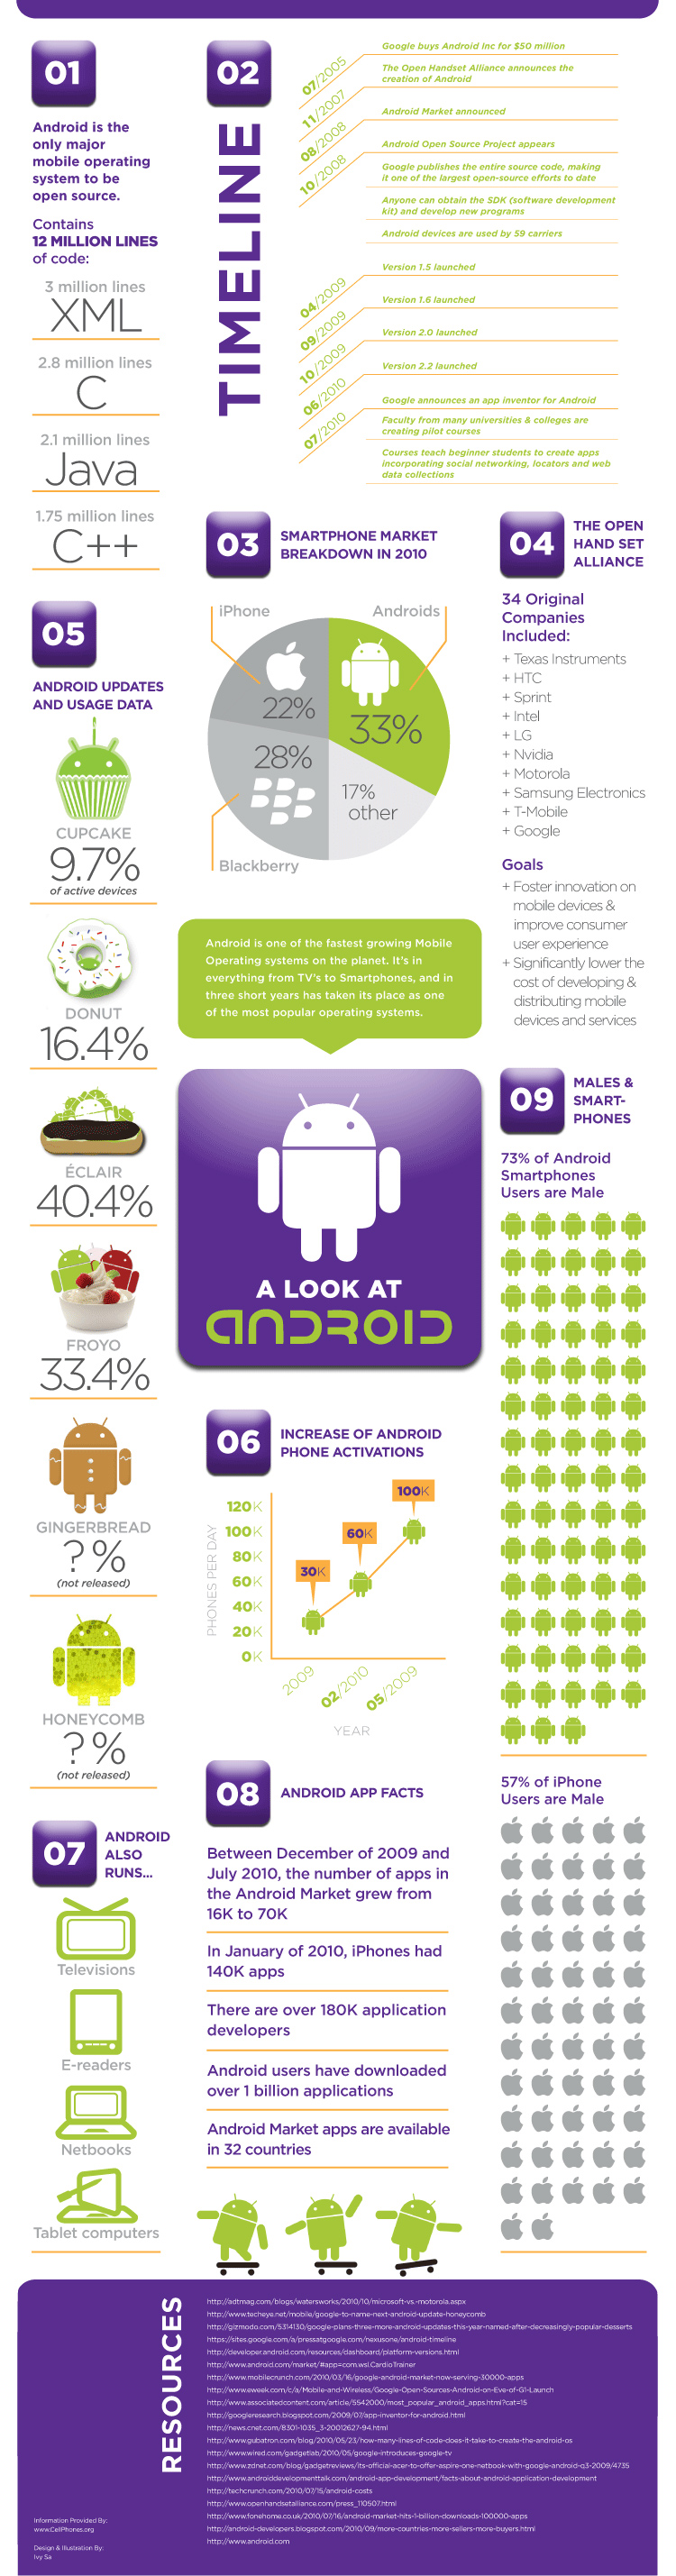 A Look at Android